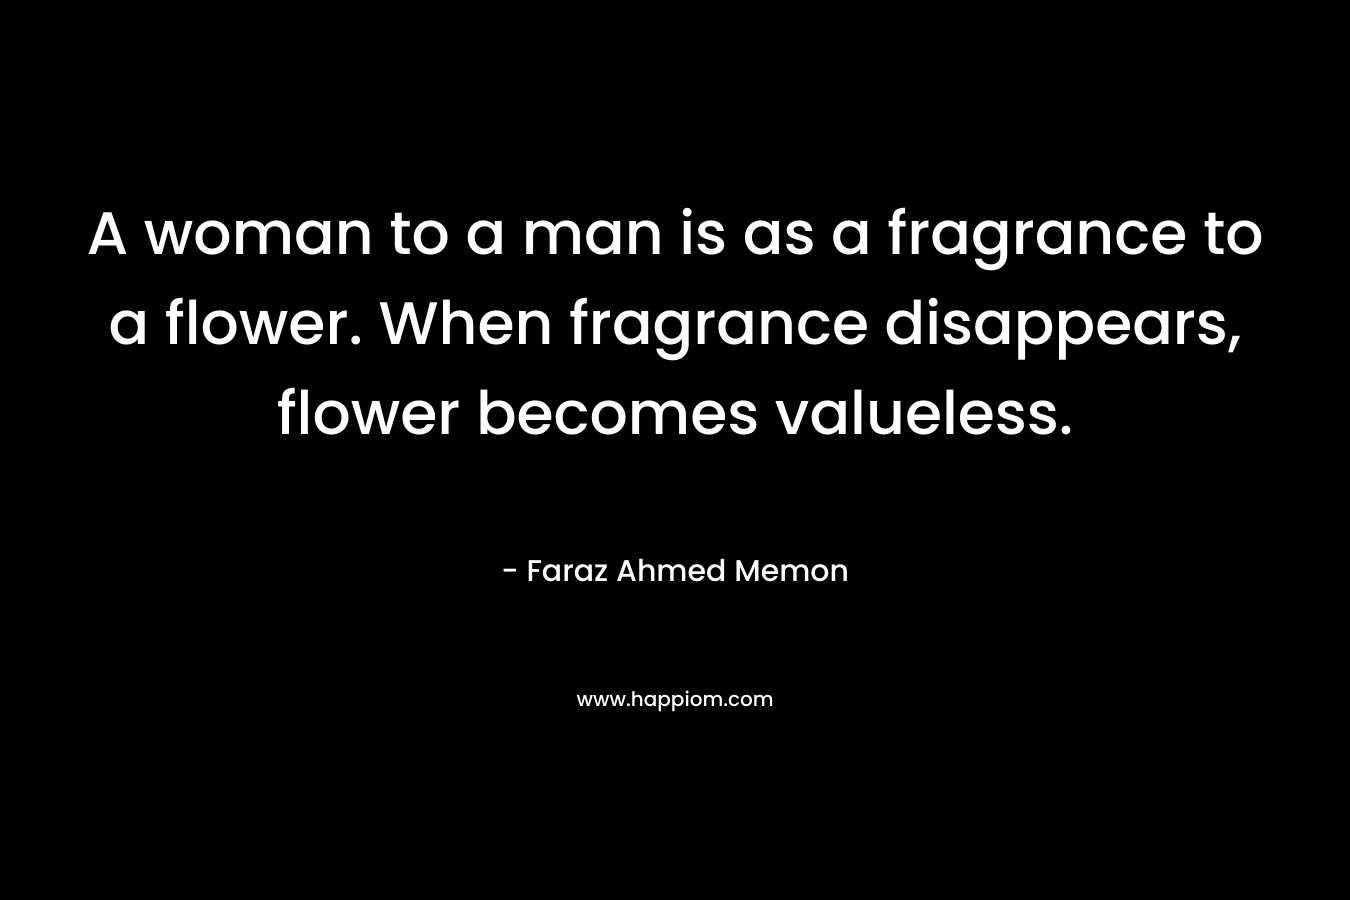 A woman to a man is as a fragrance to a flower. When fragrance disappears, flower becomes valueless. – Faraz Ahmed Memon